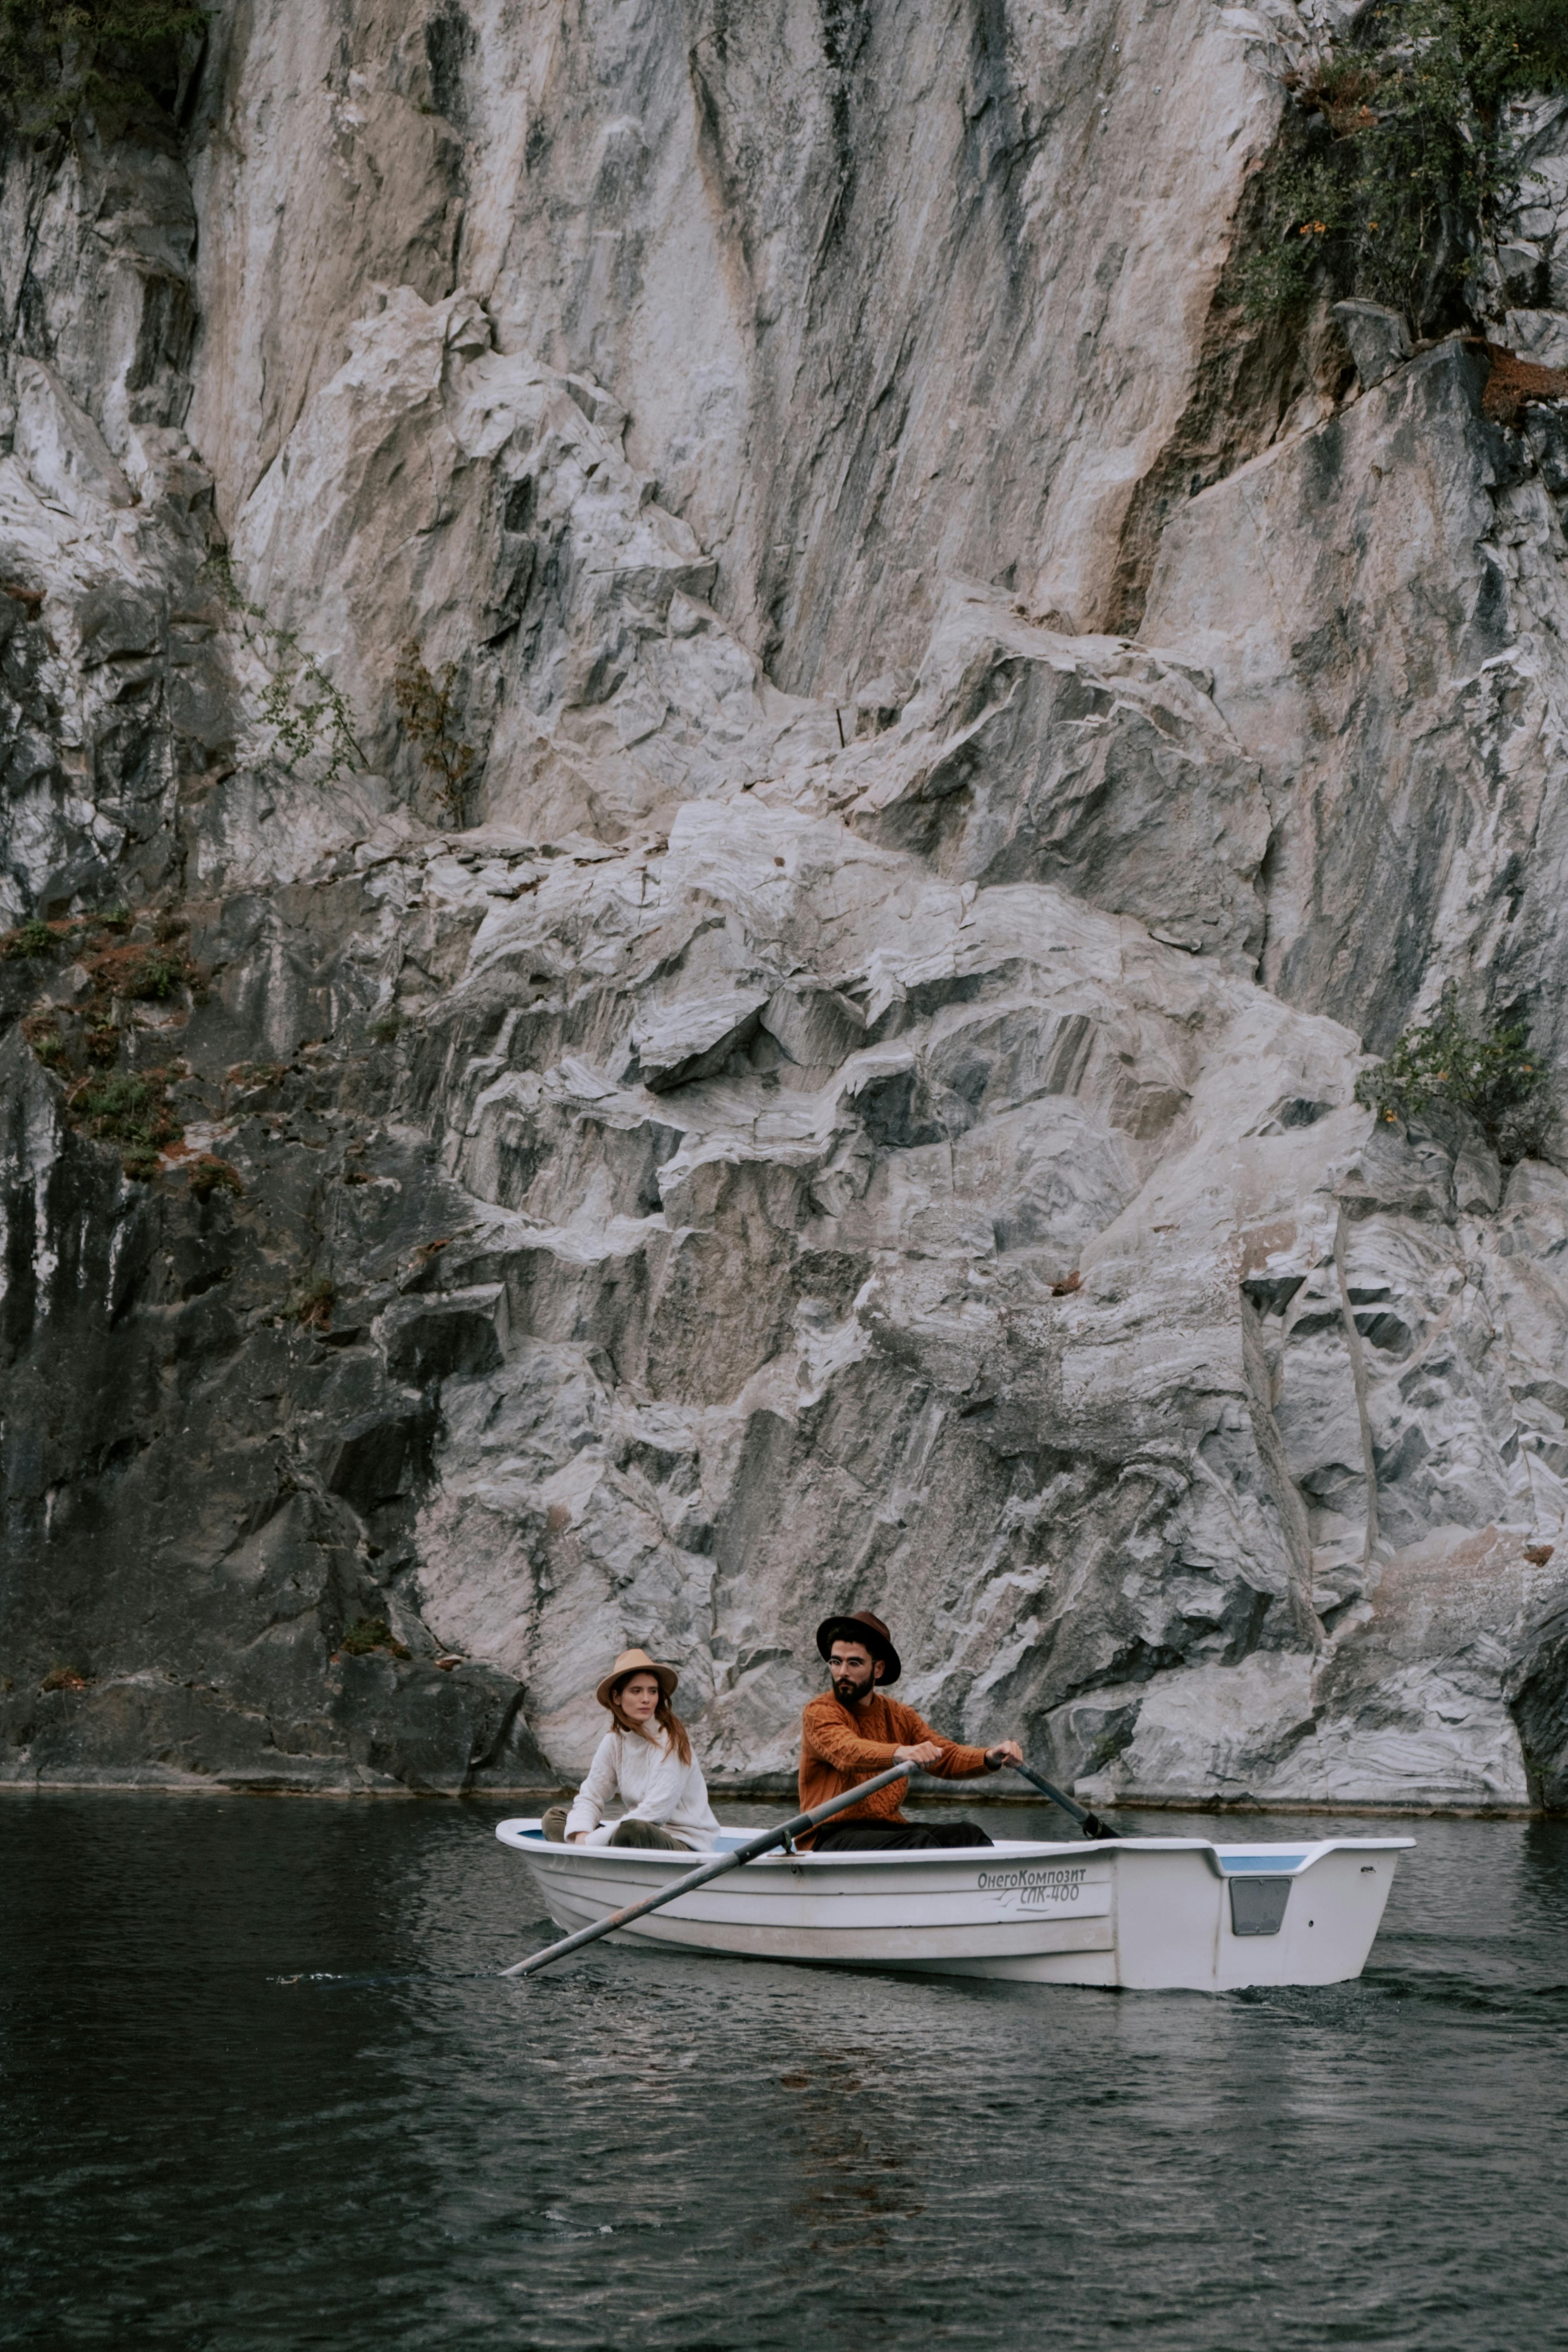 An unhappy couple on a boat | Source: Pexels